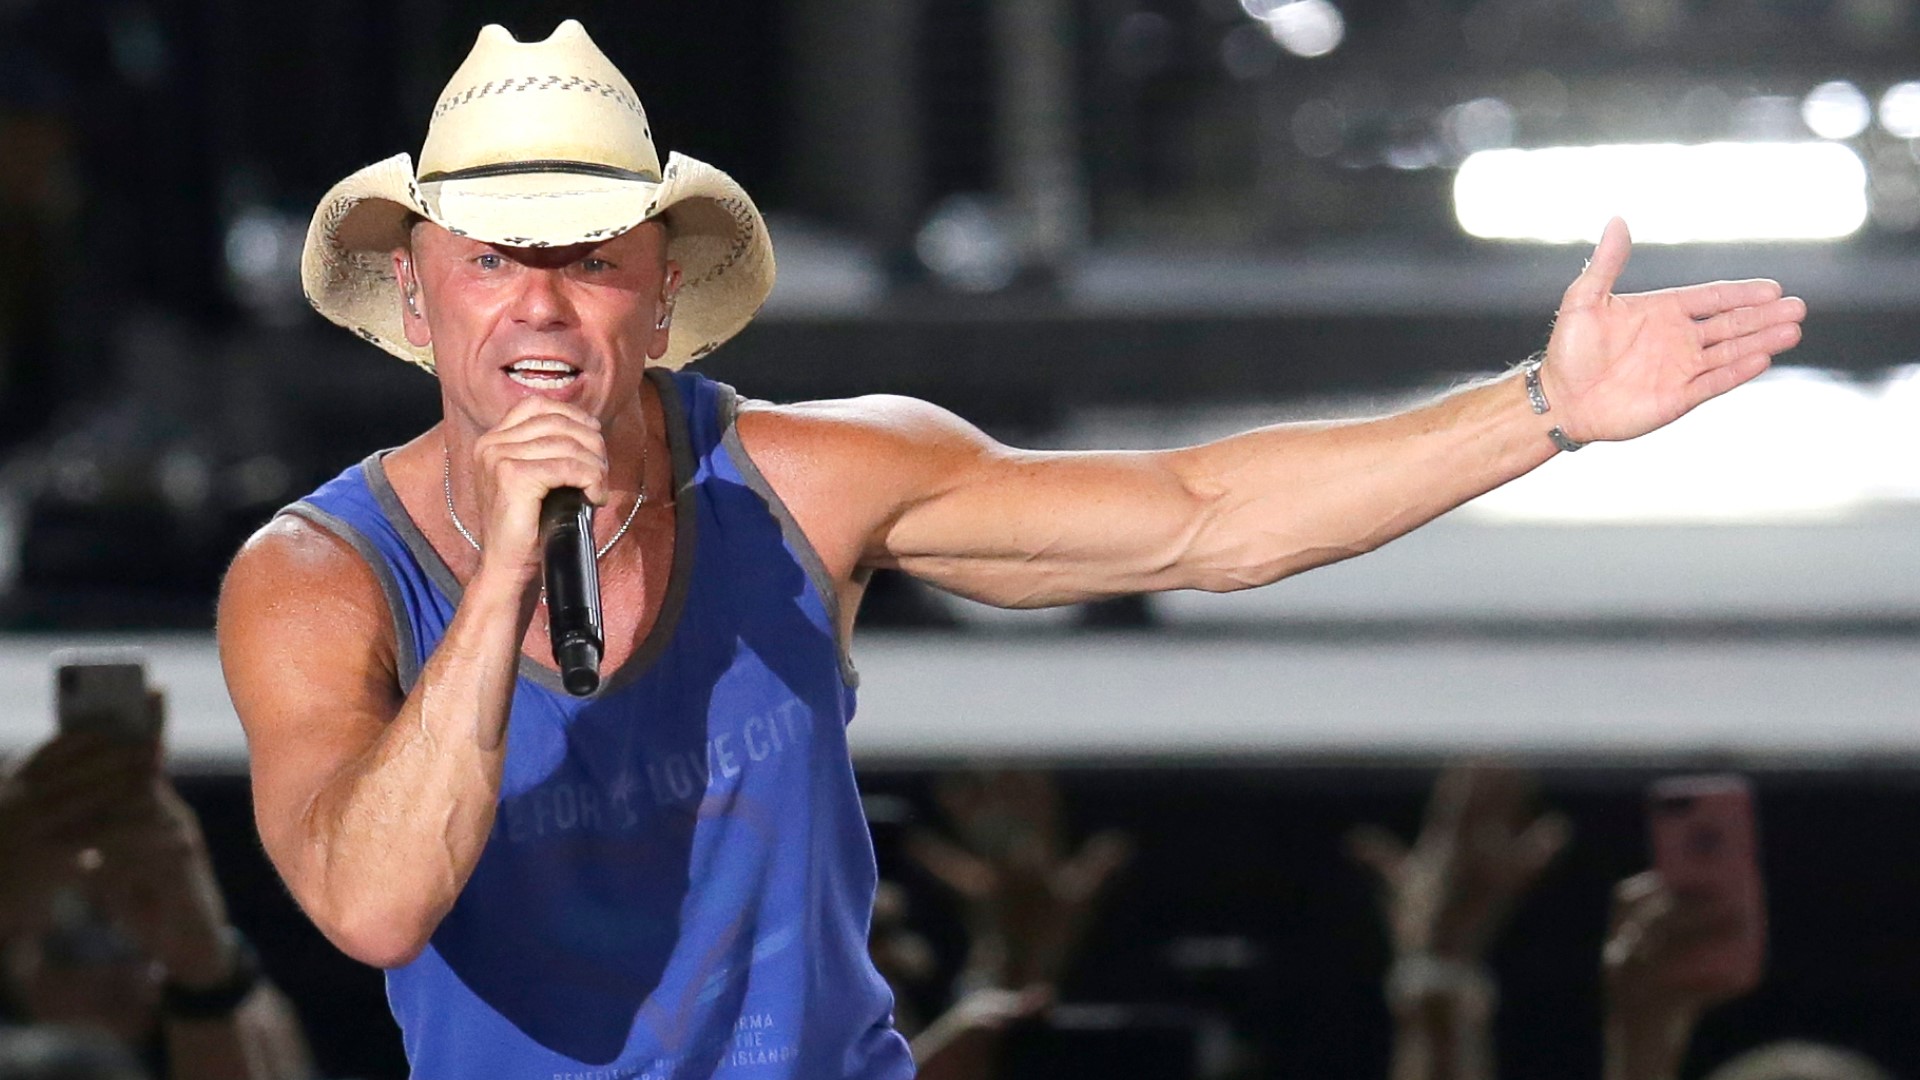 Kenny Chesney announces new lineup for 2022 stadium tour concerts